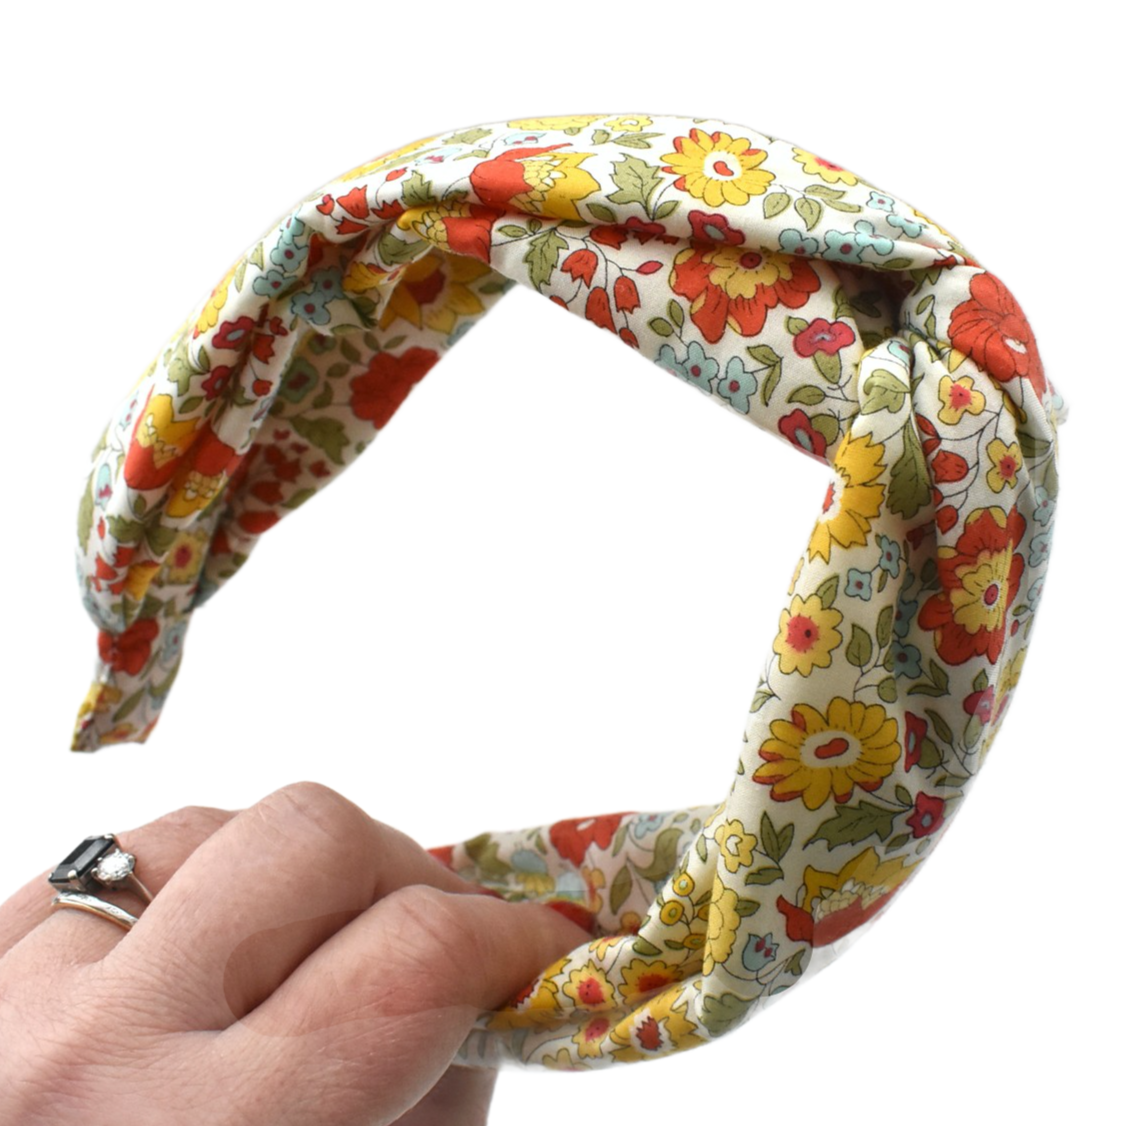 Twisted Alice Headband - Liberty of London Yellow D'anjo floral print